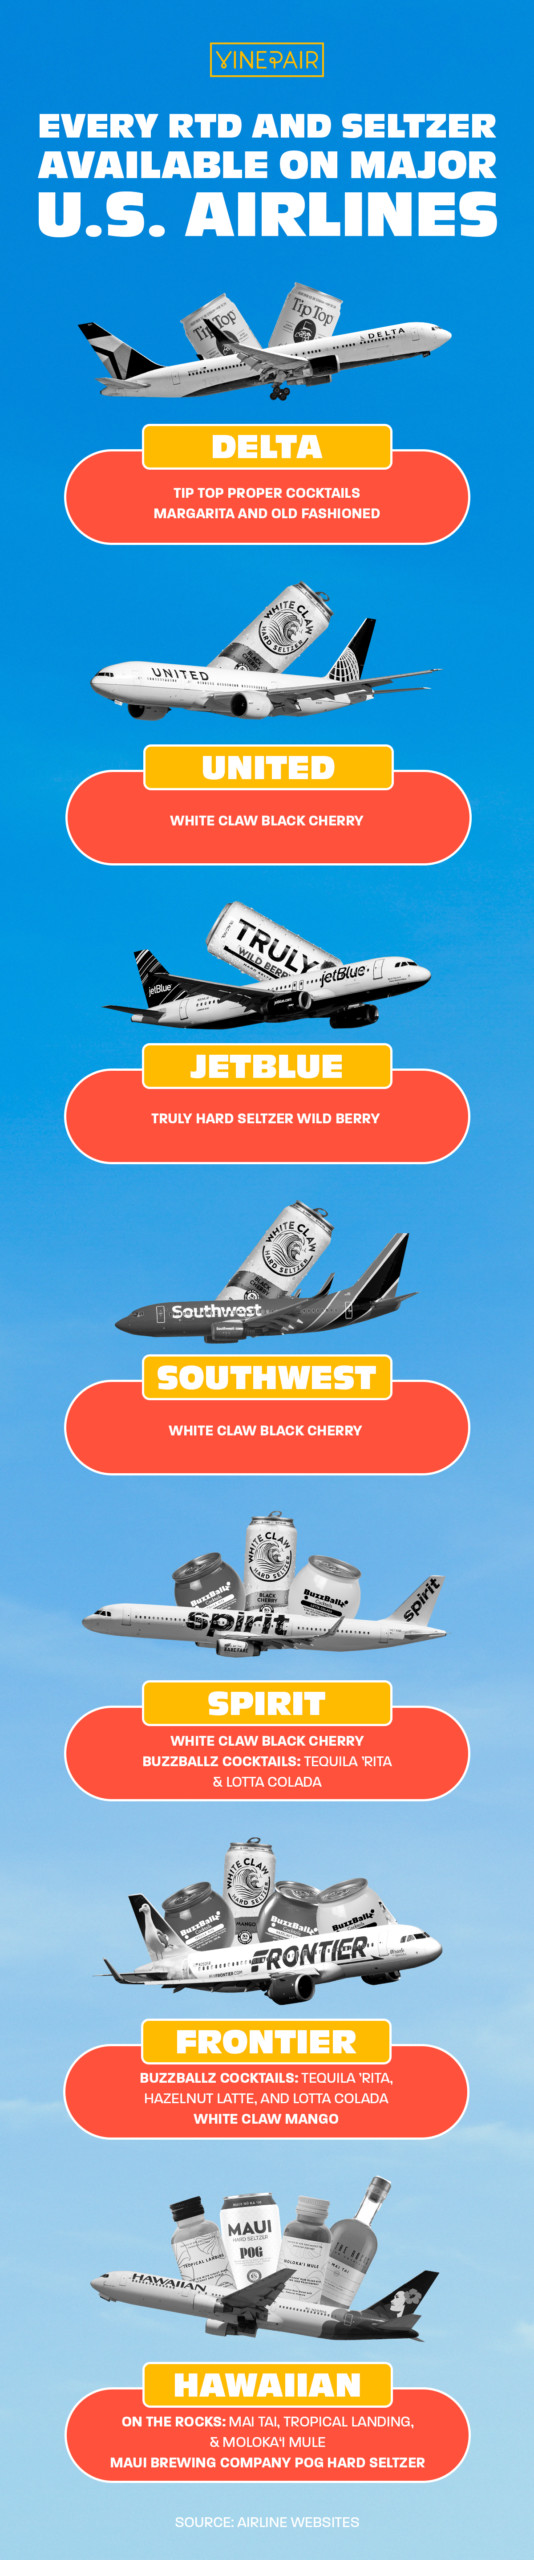 Here is every RTD and Seltzer Available on Major U.S. Airlines